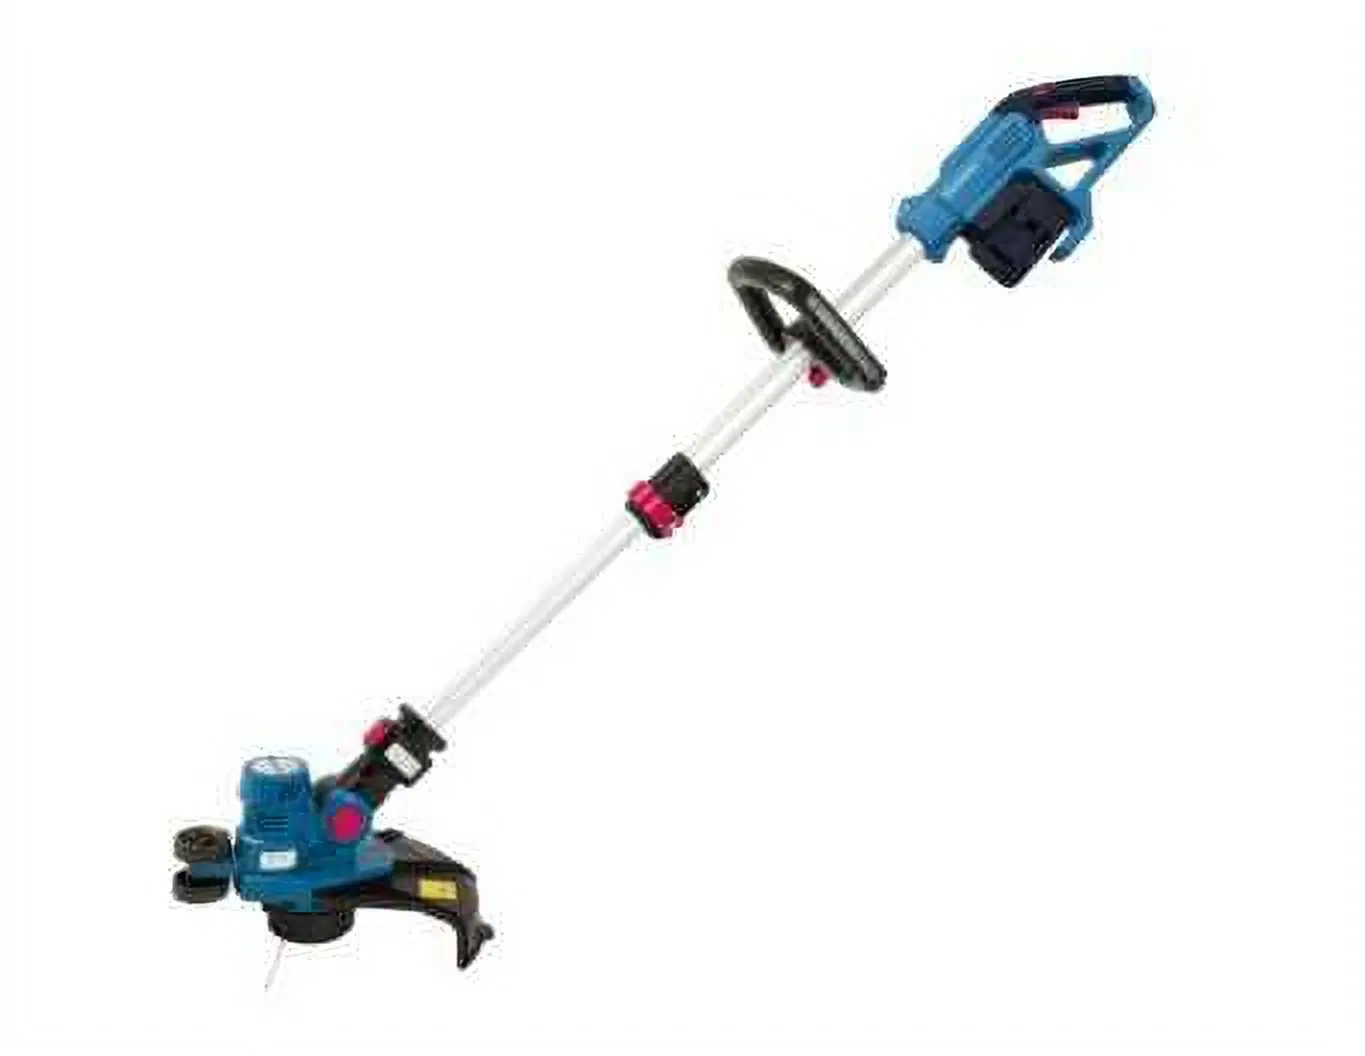 2021-New 40V (2X20V) Double-Li-ion Battery Cordless/Electric Garden Grass Trimmer-Power Tools